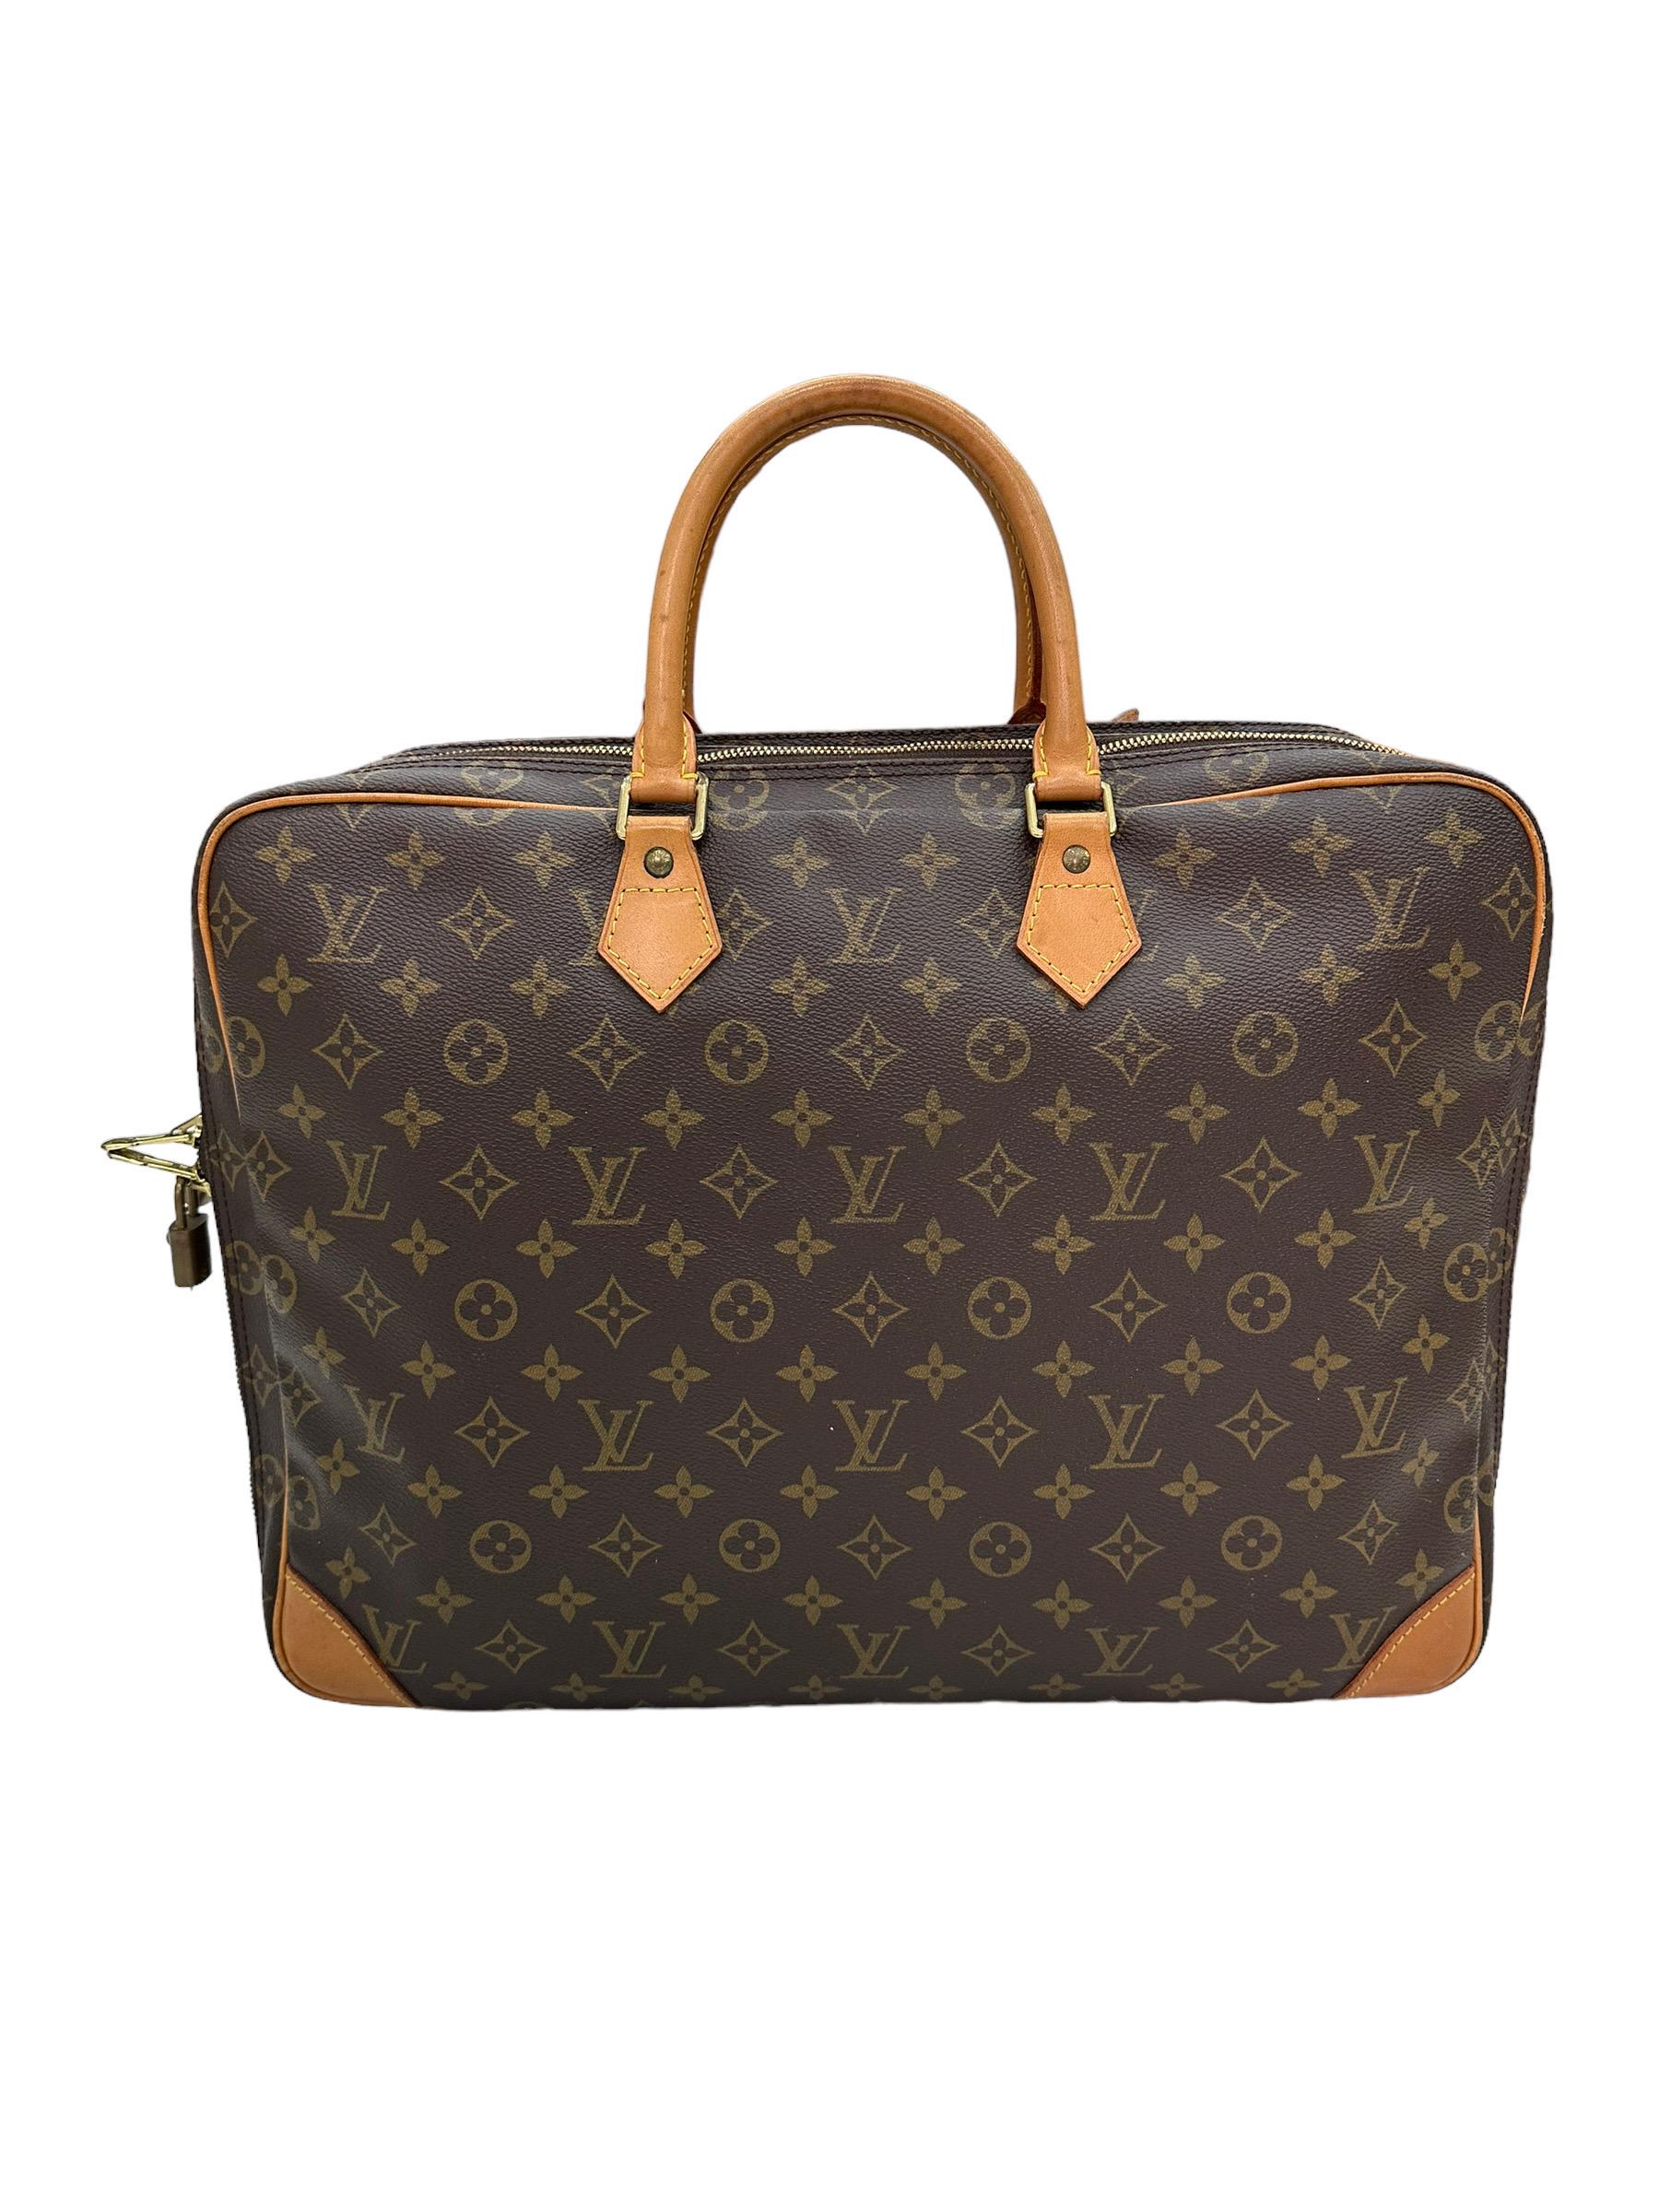 

Document Bag by Louis Vuitton, Dandy model, size GM, made of brown leather in the classic monogram pattern, with cowhide inserts and golden hardware. Divided into two compartments, each of them equipped with a zip closure. Fitted with two rigid